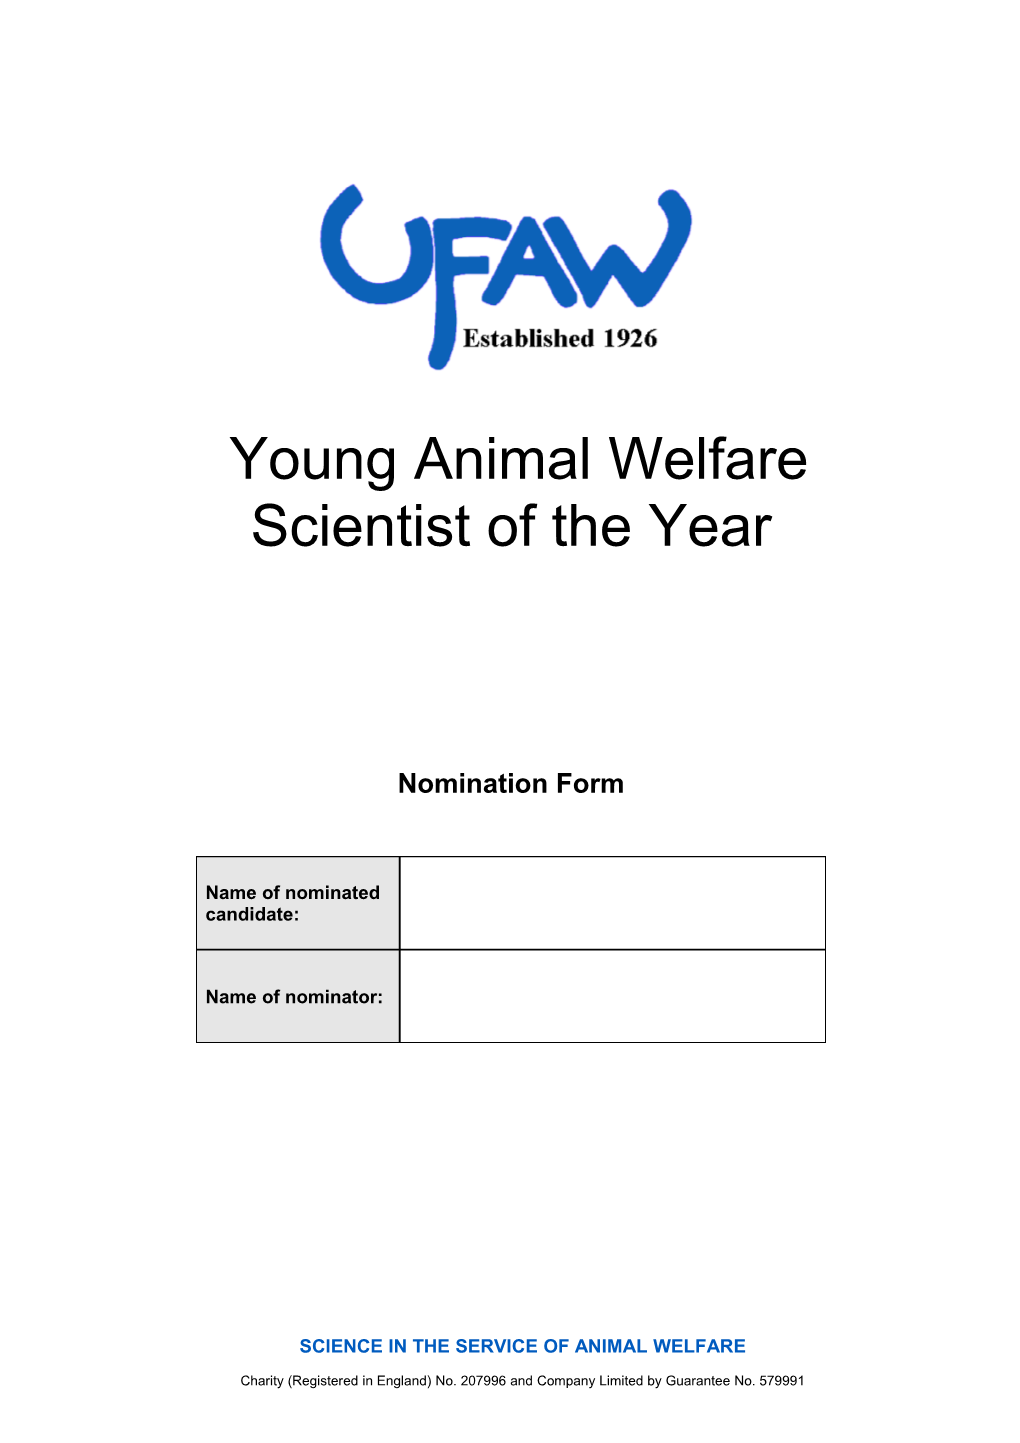 Young Animal Welfare Scientist of the Year Award